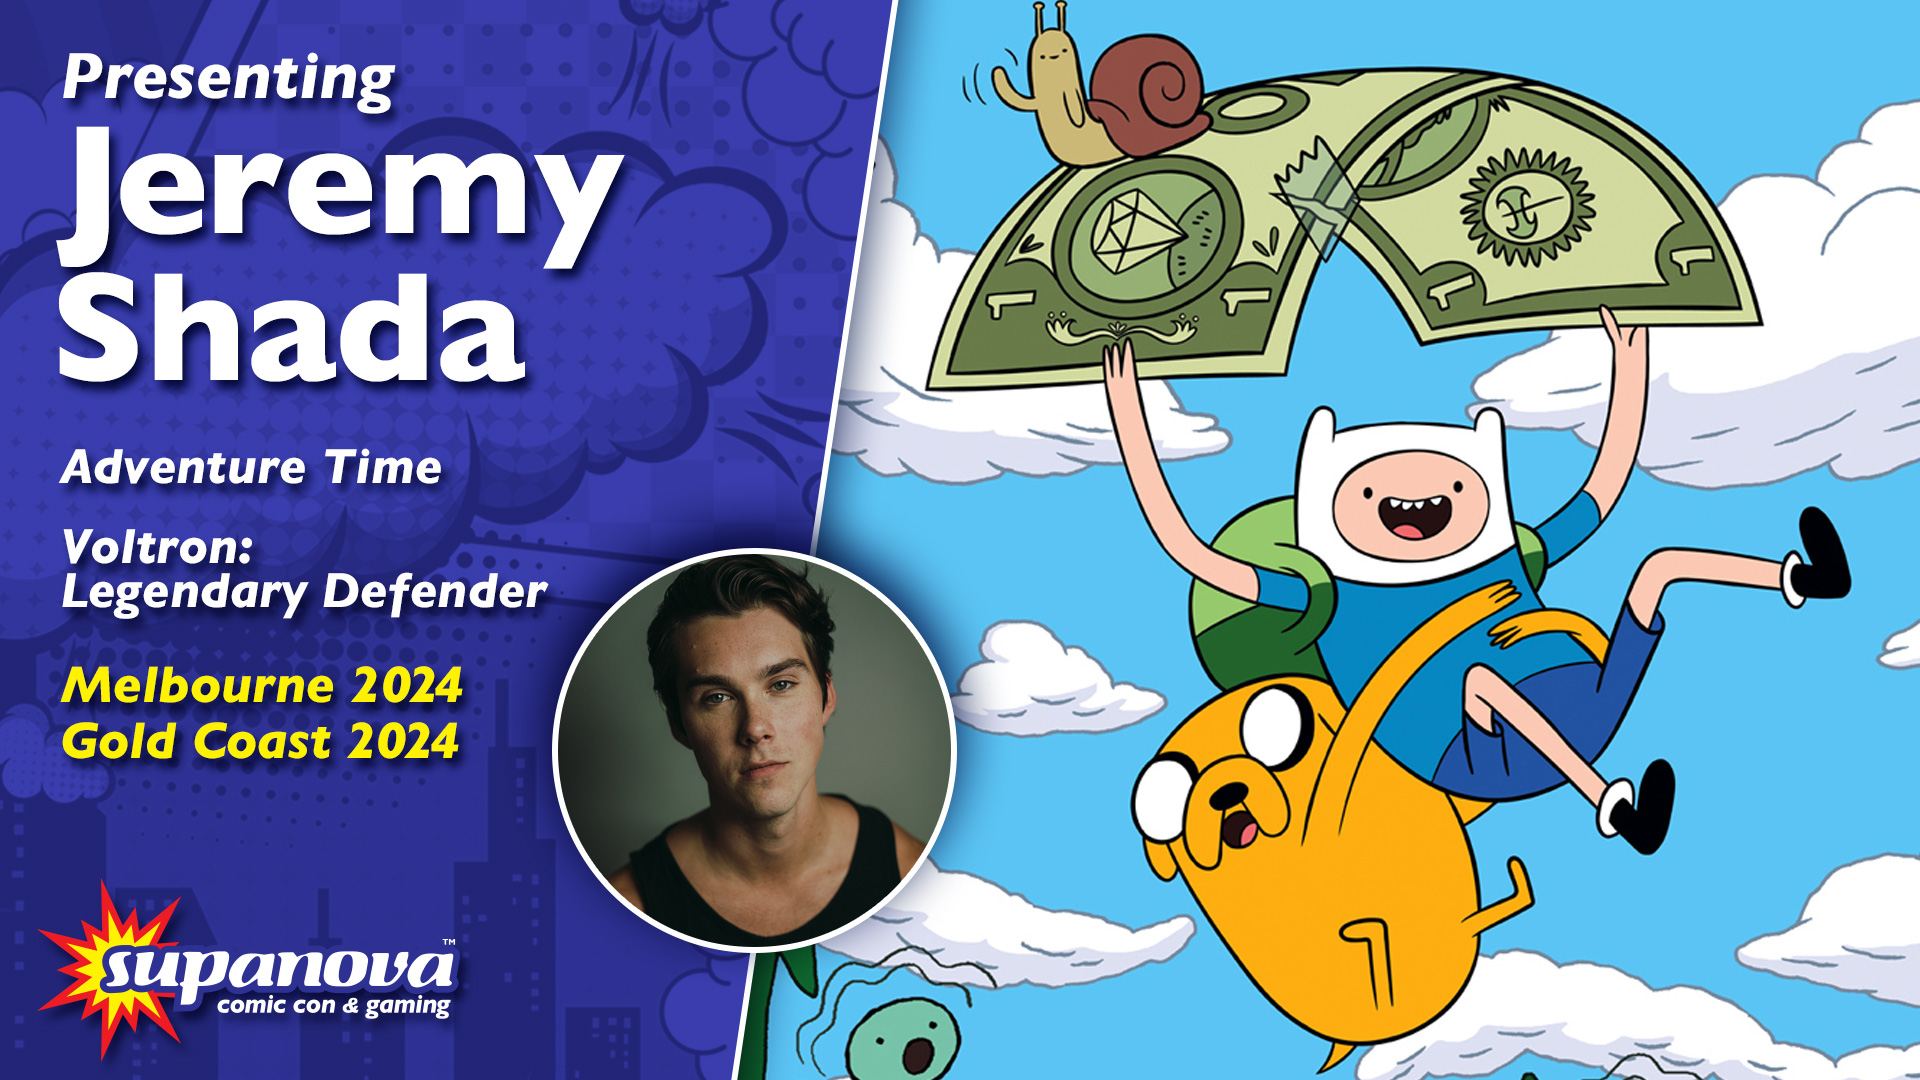 Supanova Comic Con & Gaming on X: "Mathematical! Jeremy Shada, the human  behind Finn the Human from Adventure Time joins us for Melbourne and the  Gold Coast! You may also recognise Jeremy's